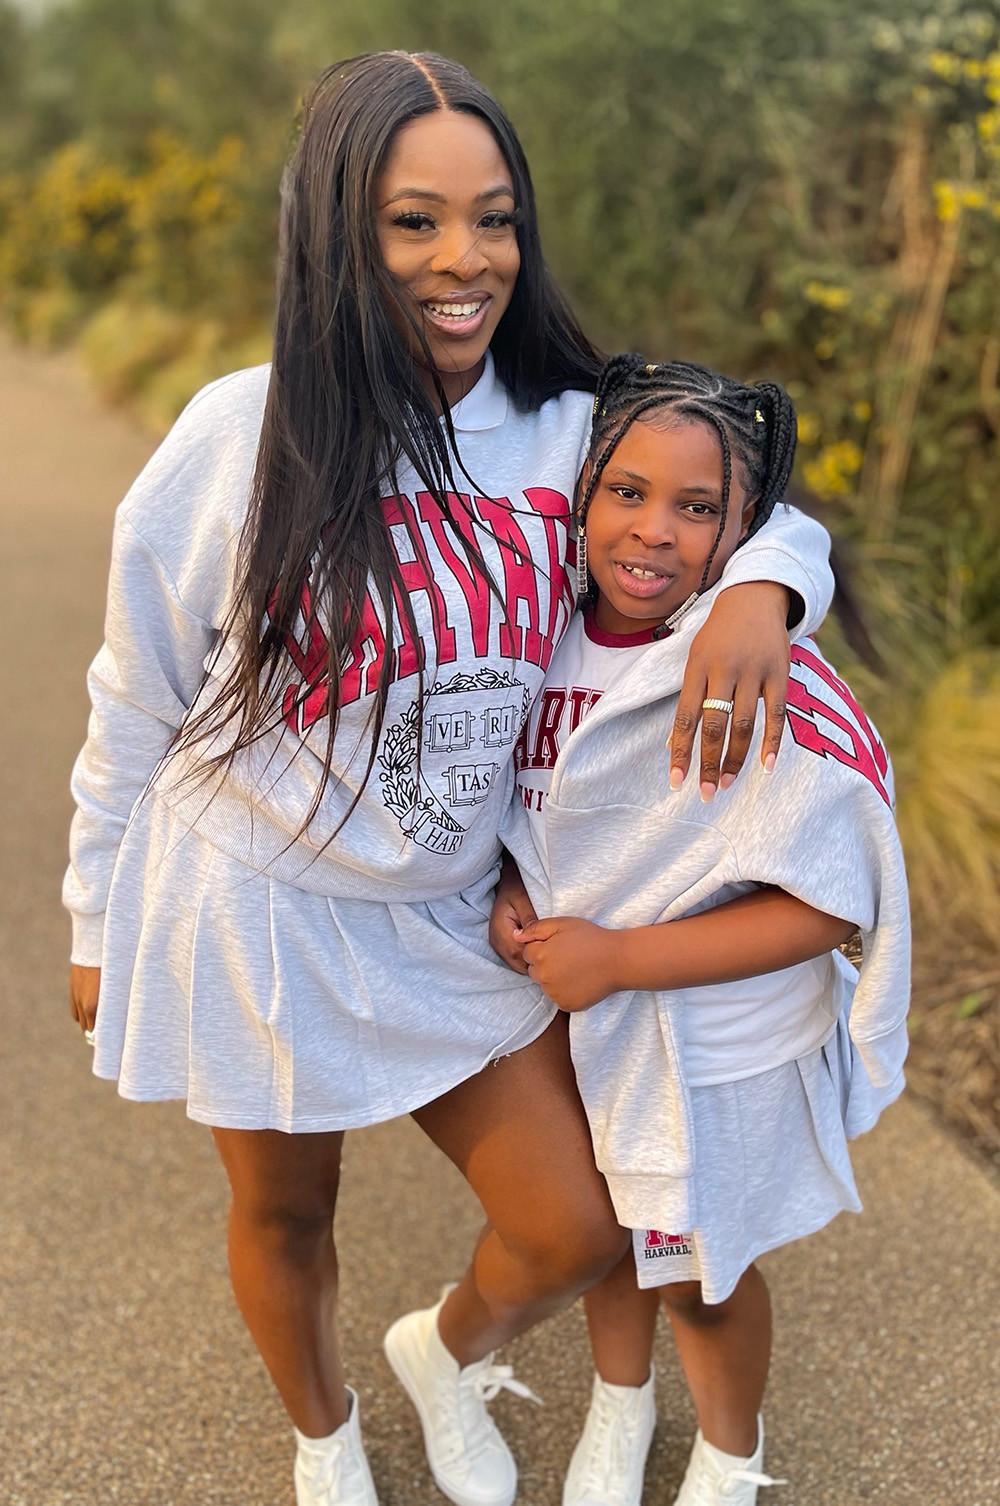 Mother and Daughter wear grey Harvard sweatshirts and tennis skirts